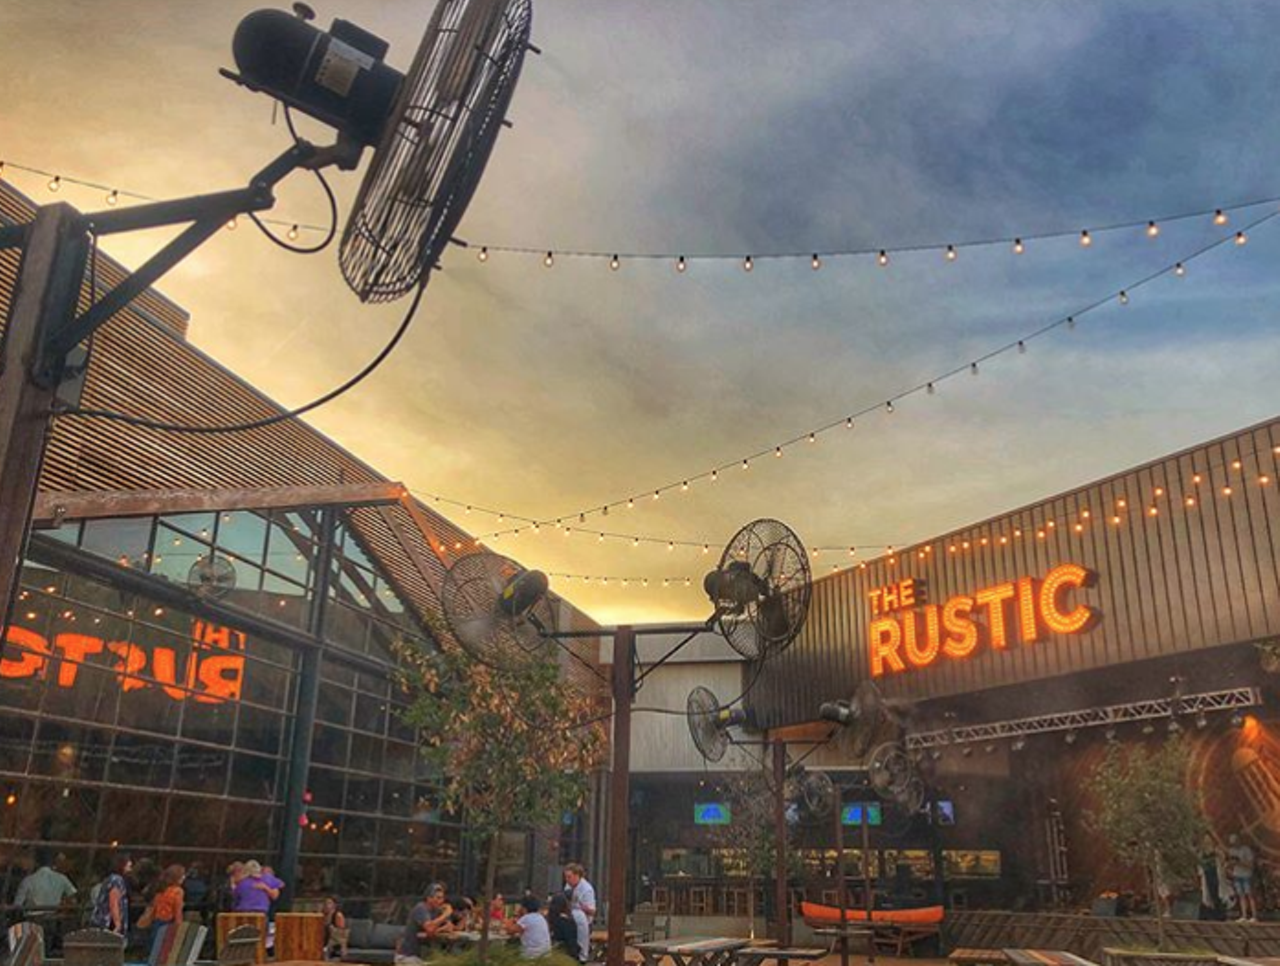 The Rustic
17619 La Cantera Pkwy Ste 204, (210) 245-7500, therustic.com
Sure, The Rustic is a favorite for beer lovers, but it's also a badass spot for live music! With an eclectic variety of acts coming through, there's bound to be a show that peaks your interest.
Photo via Instagram / nikixixixi